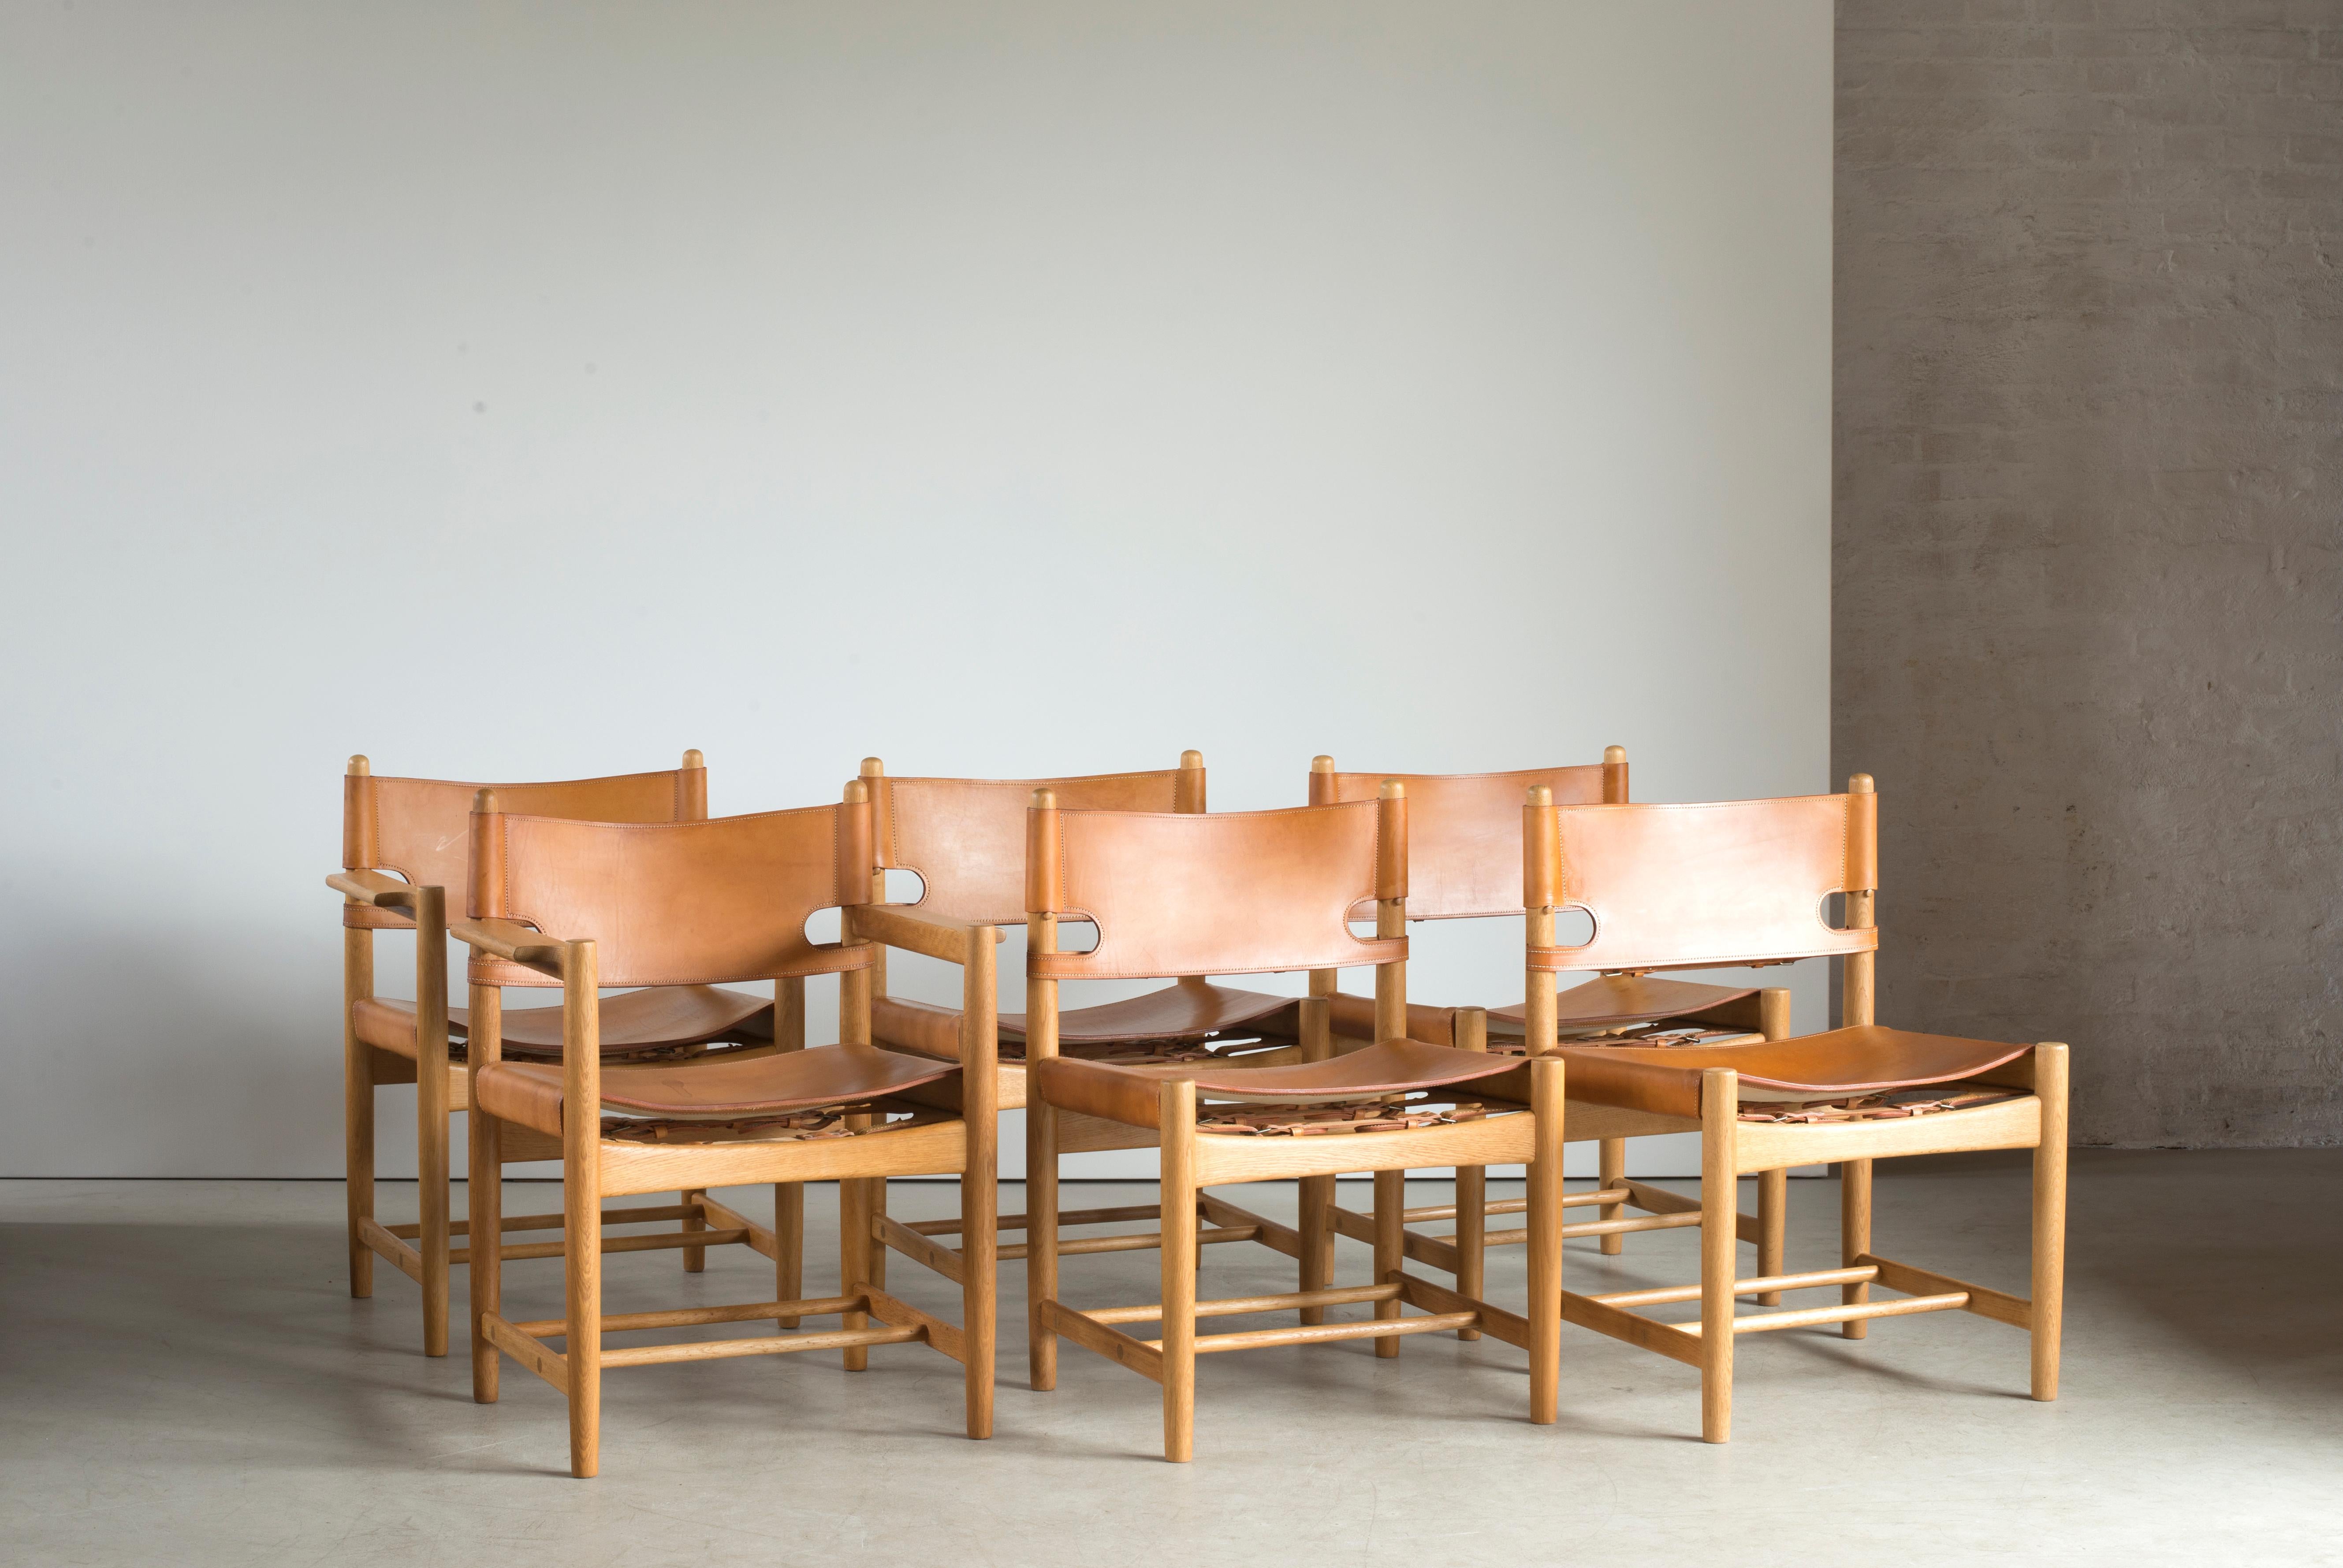 Børge Mogensen set of six dining chairs of oak and natural tanned leather. Two chairs with arms. Executed by Fredericia Furniture.